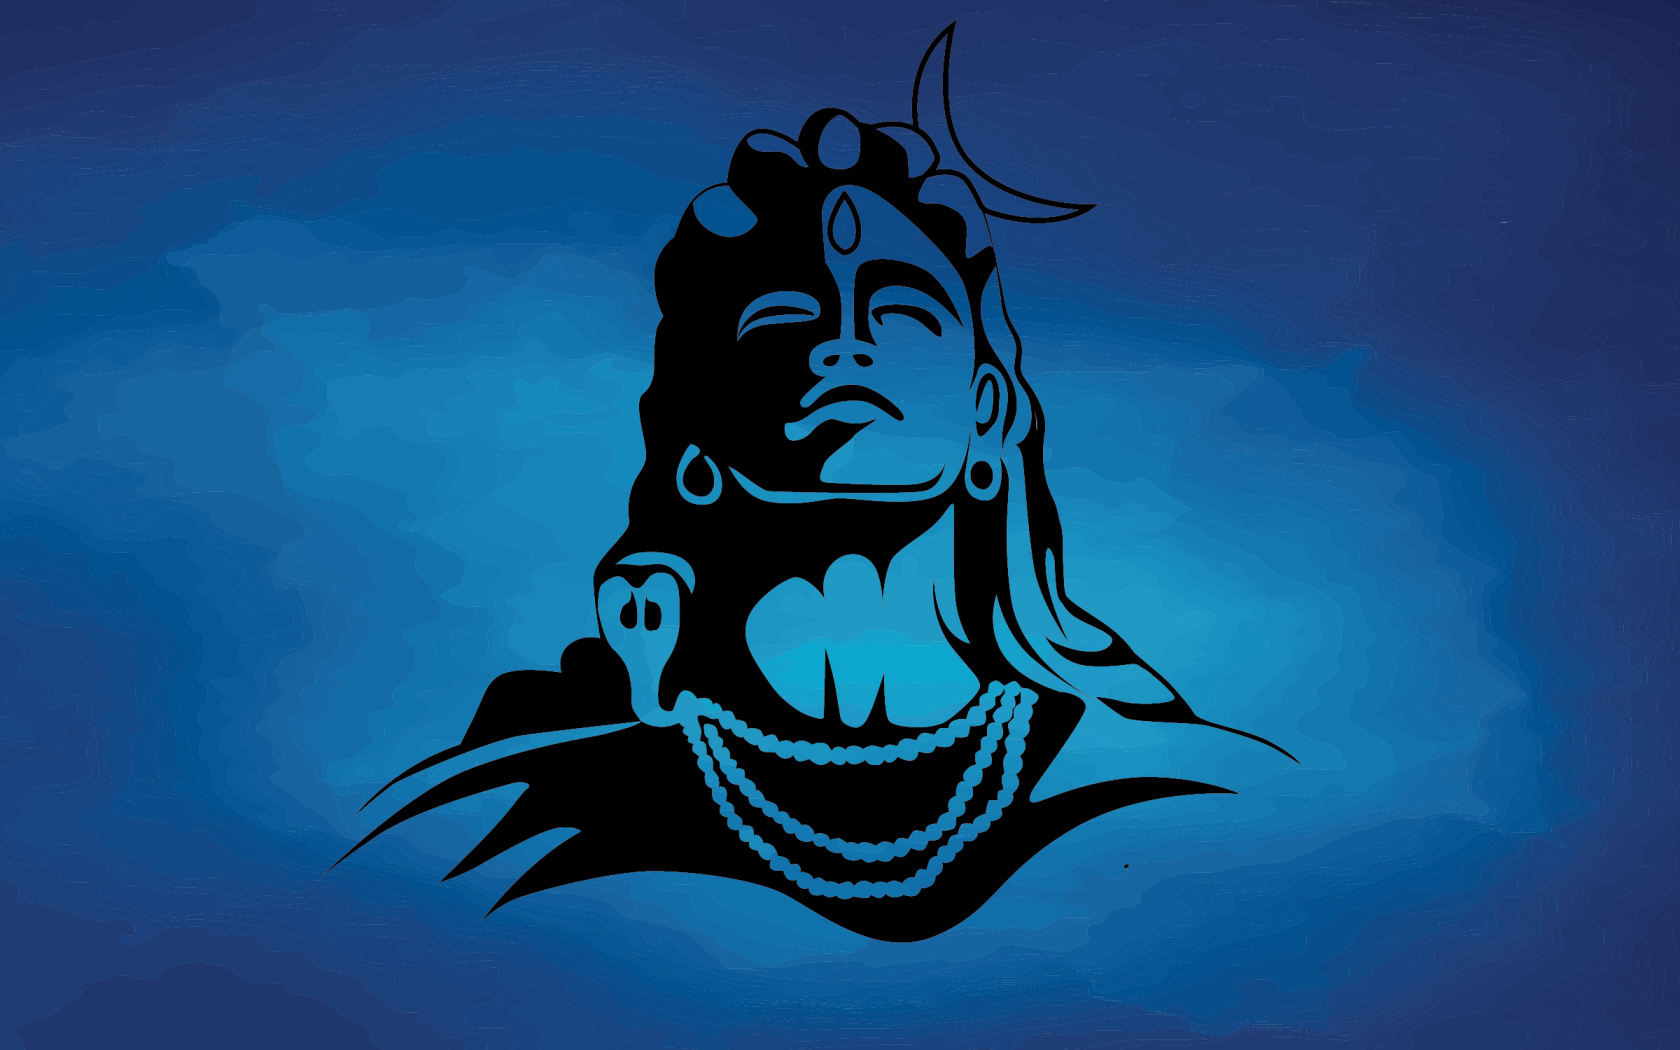 Painted Lord Shiva on a blue background